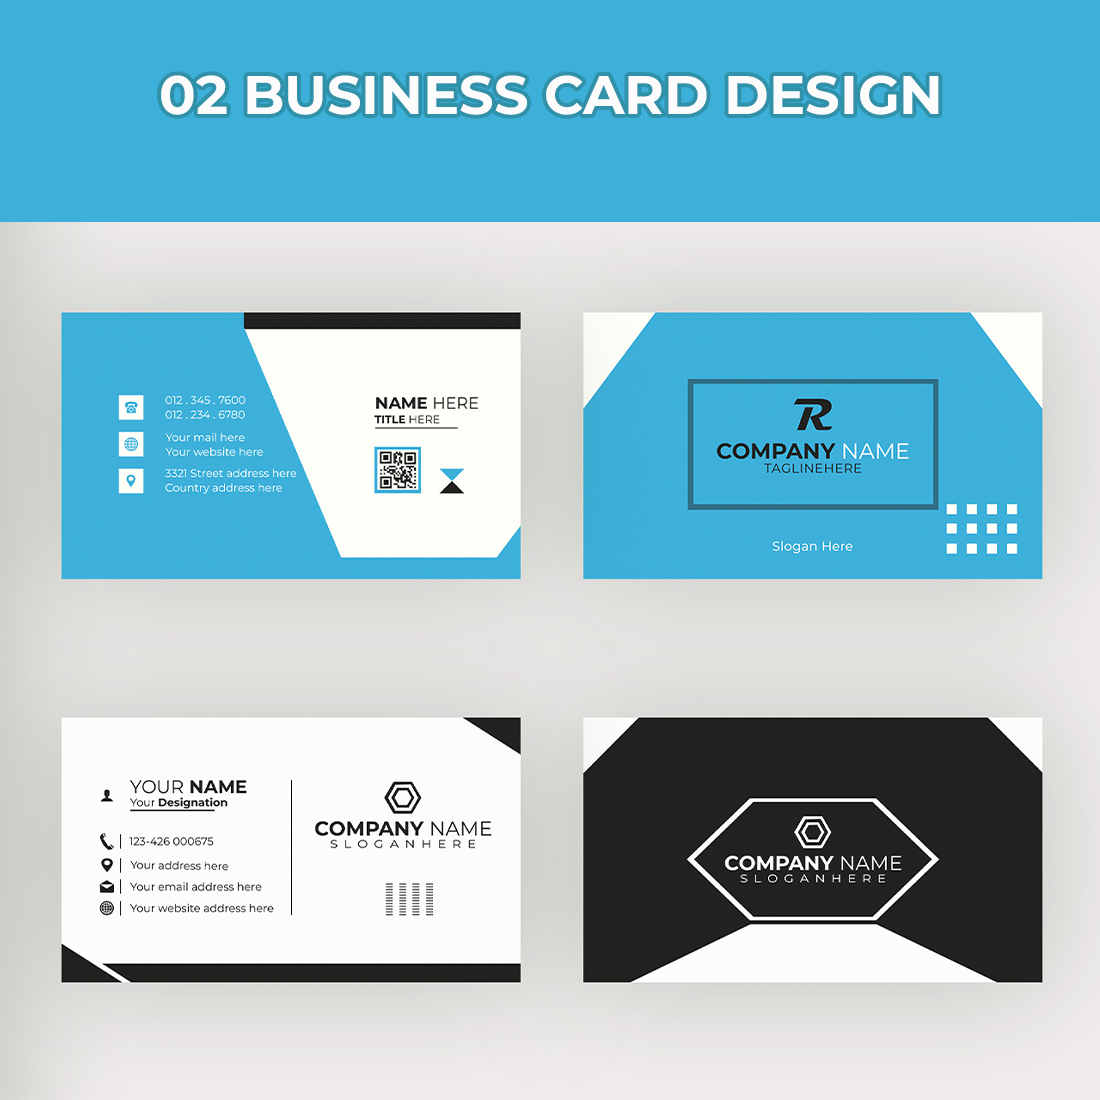 Professional business card design templates cover image.